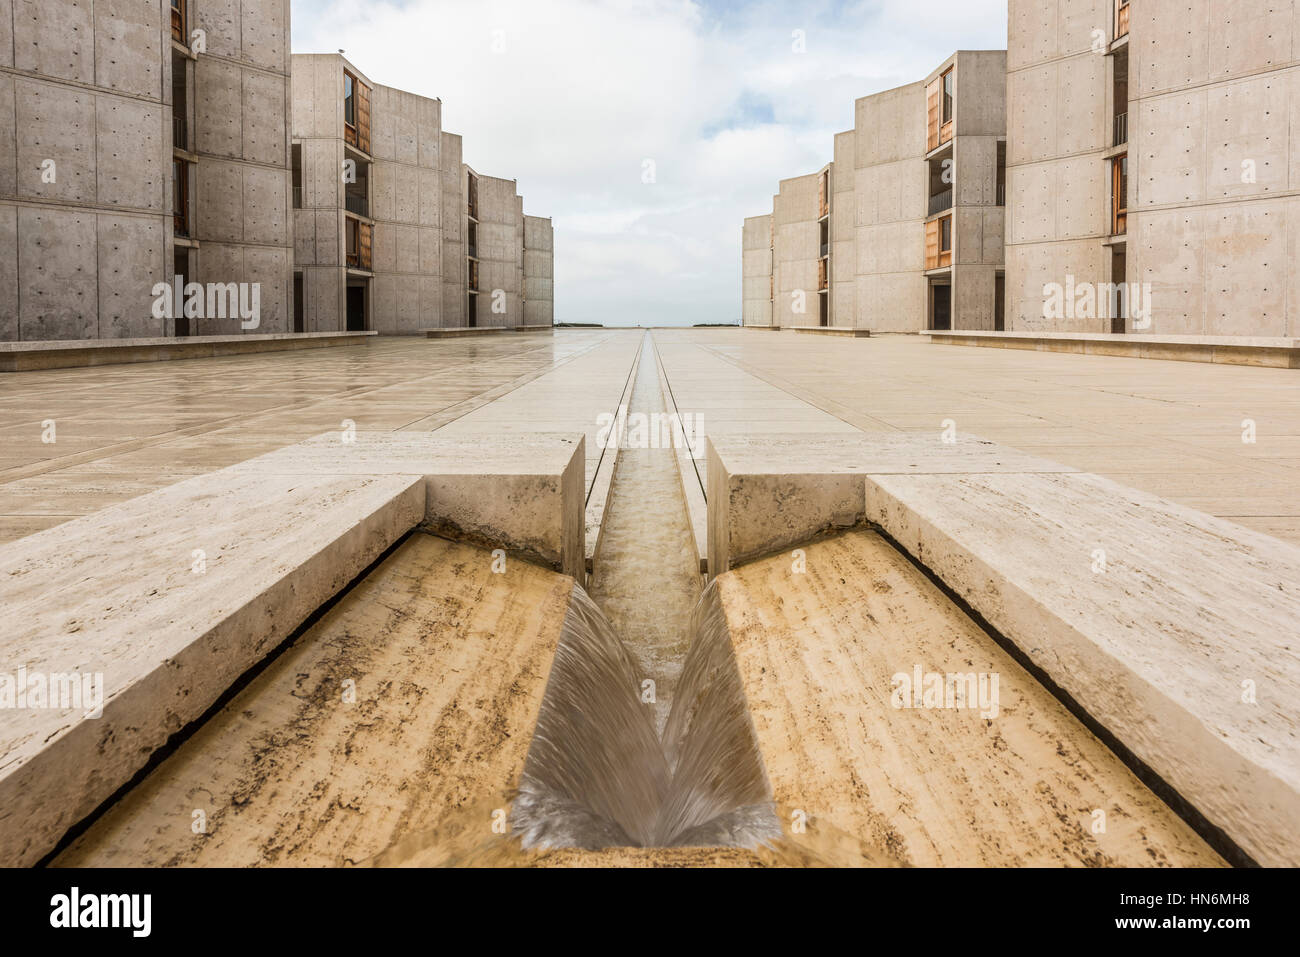 La Jolla, USA - December 10, 2015: Symmetrical architecture of the Salk Institute in San Diego with fountain vanishing point Stock Photo